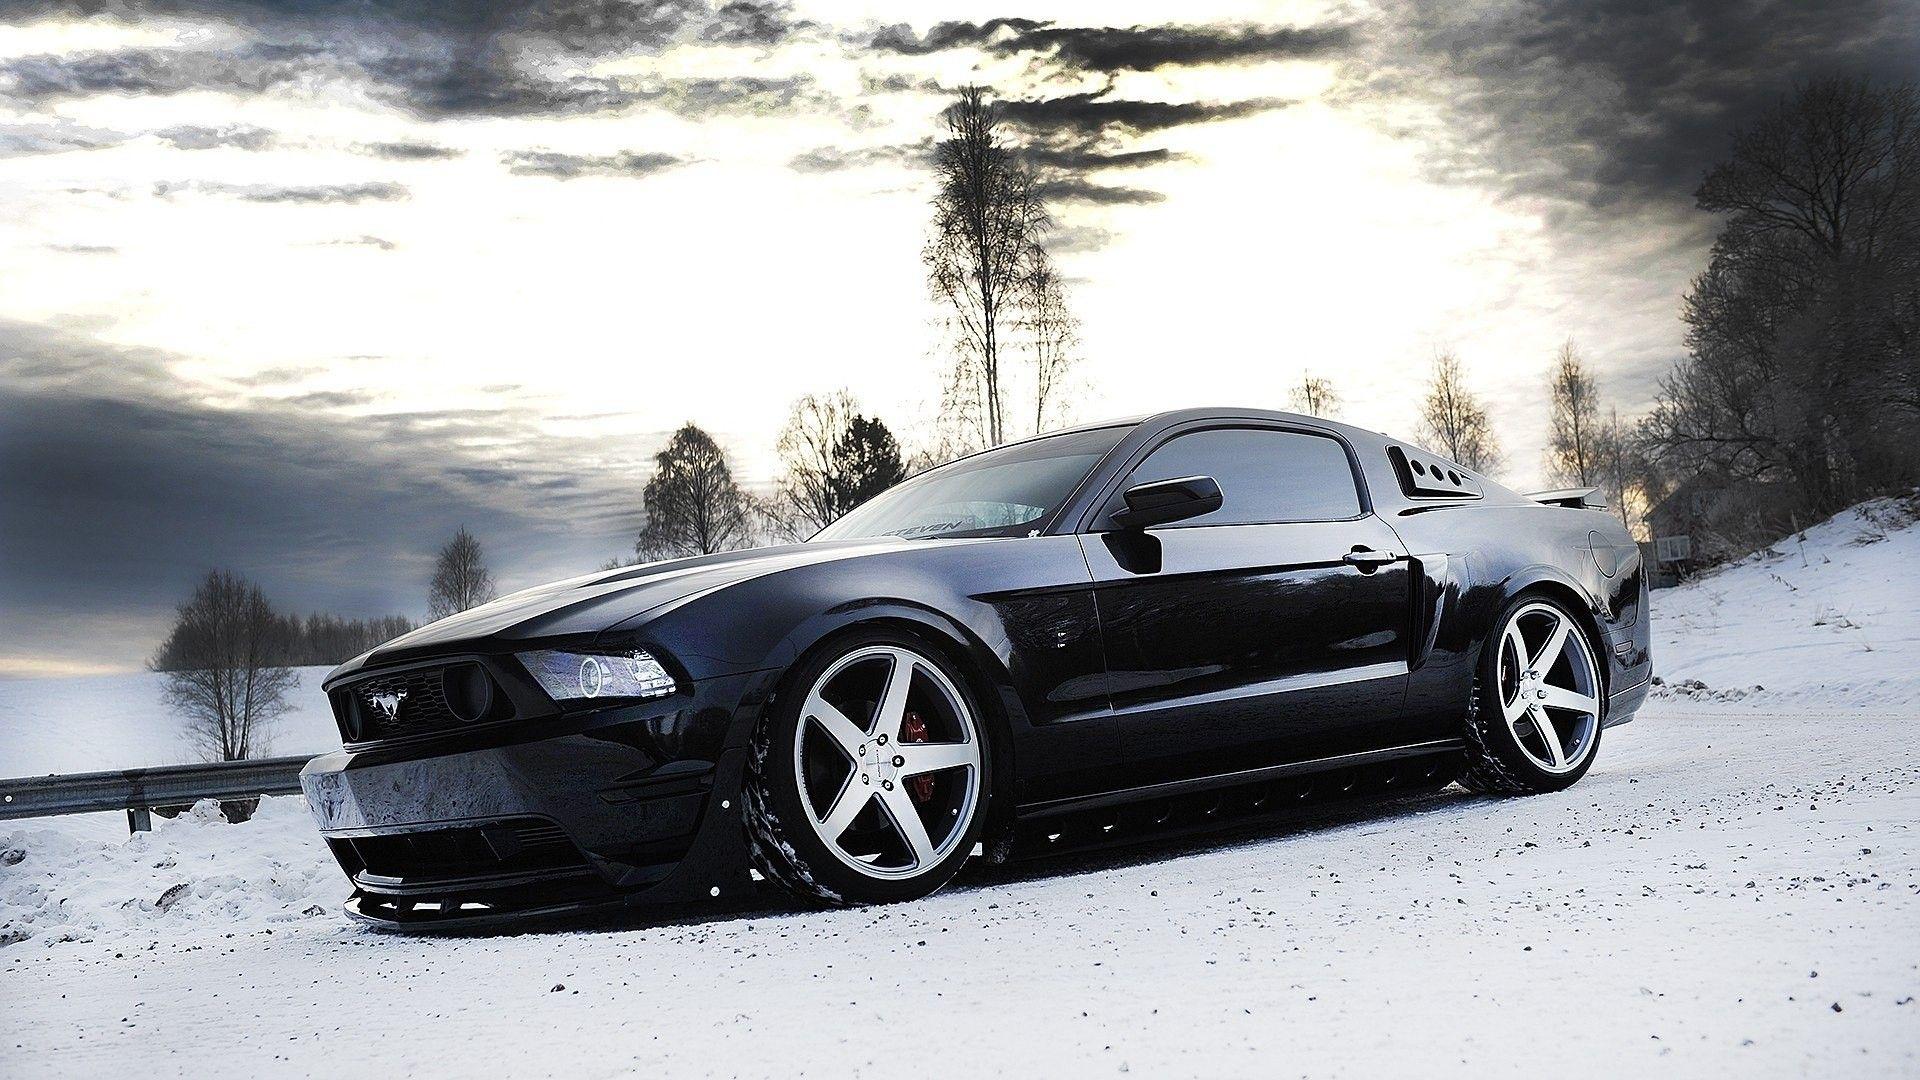 Ford Mustang Fastback Wallpaper. Excellent Ford Mustang Fastback